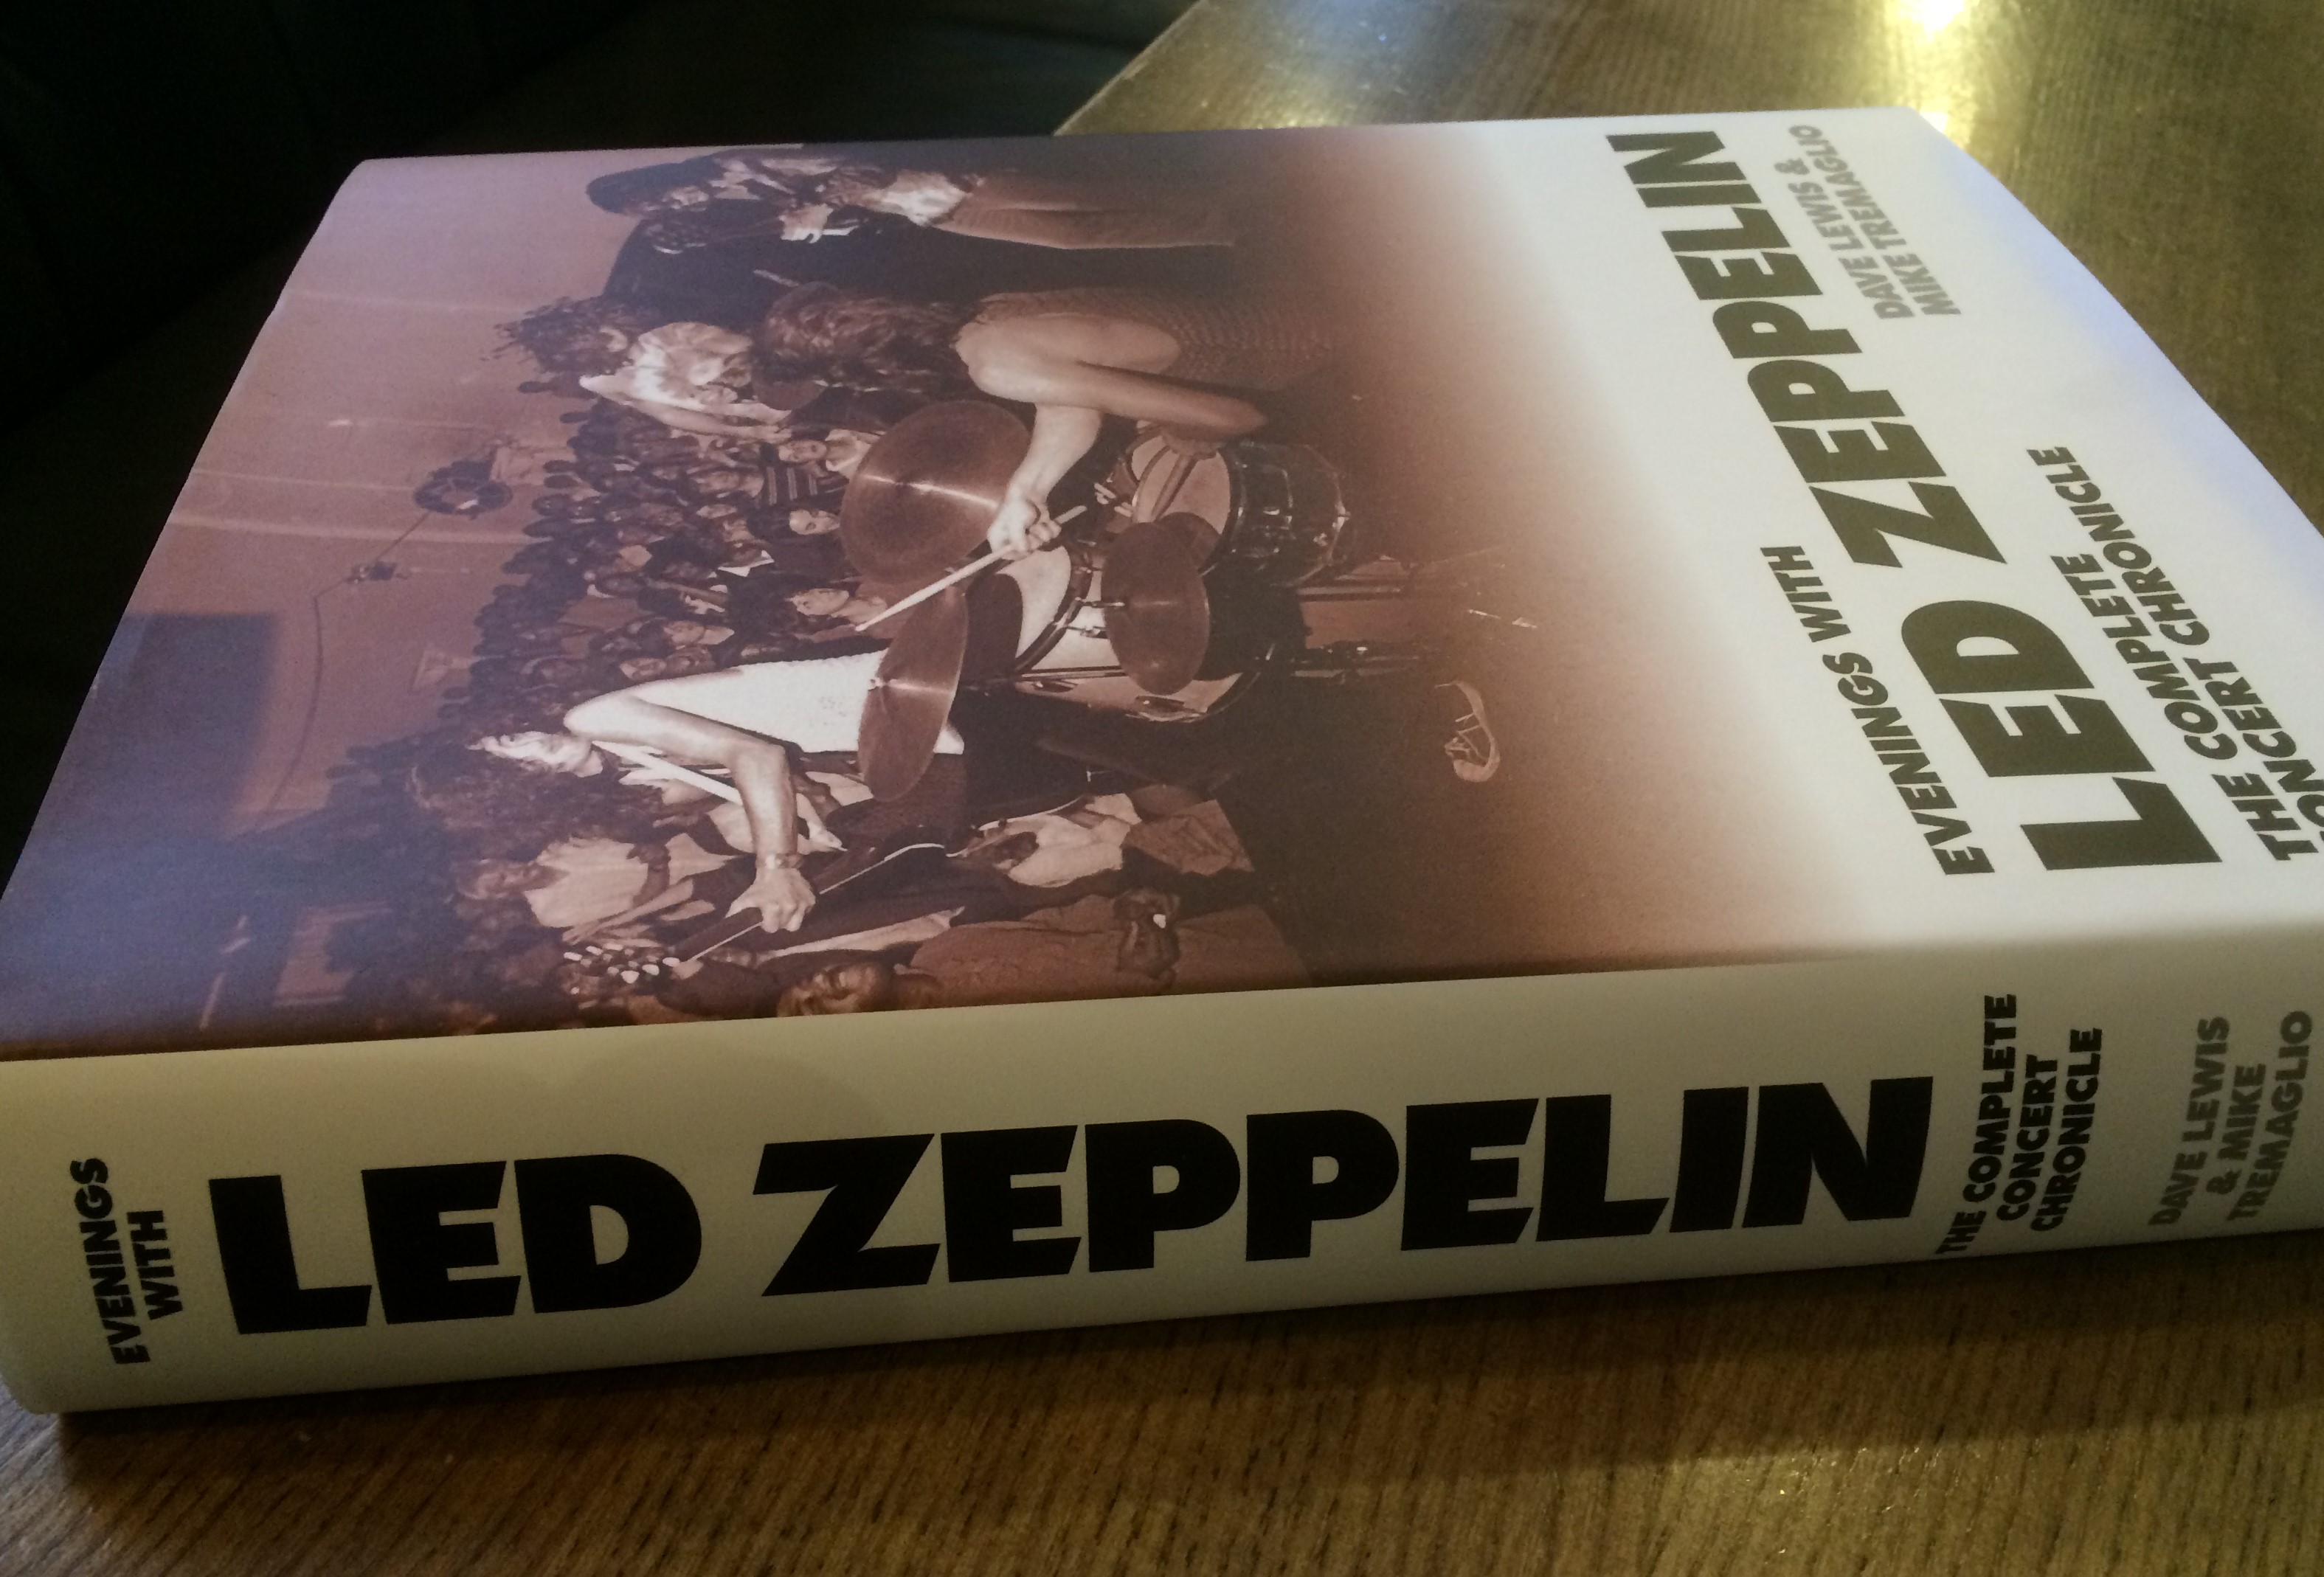 Tight But Loose » Blog Archive EVENINGS WITH ZEPPELIN FESTIVAL OF SOUND LAUNCH/PLANET ROCK/JOHN FESTIVAL /LZ NEWS/ THE SONG REMAINS THE SAME REMASTERED REVIEWS/ LZ LIVE REVIEWS/DL DIARY